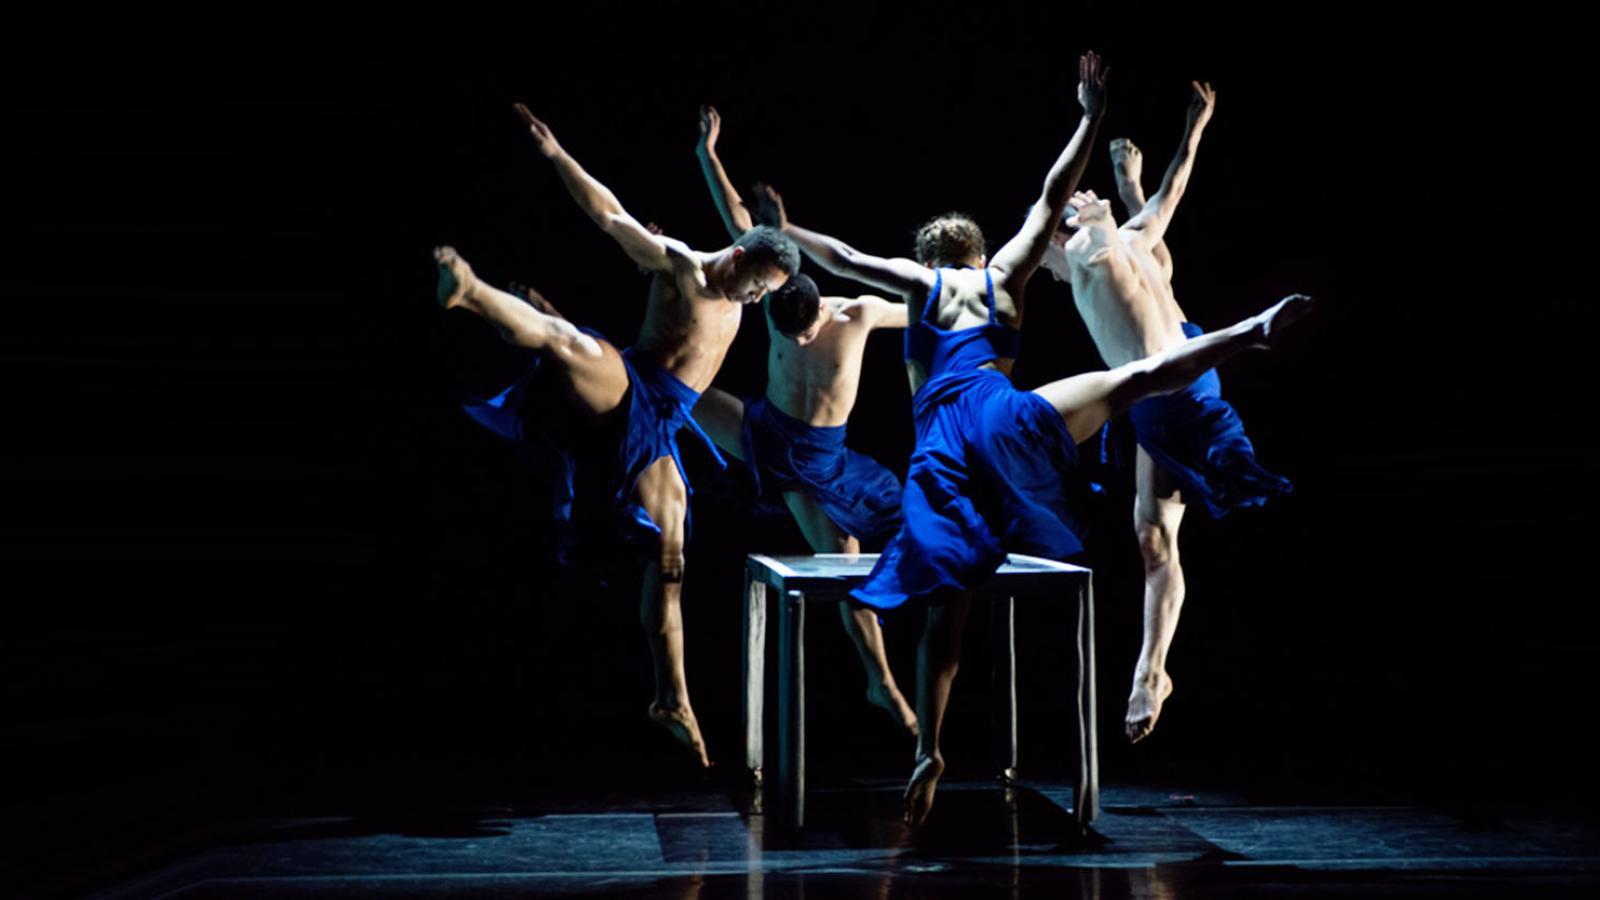 Commercial dance students wearing blue on stage caught in motion